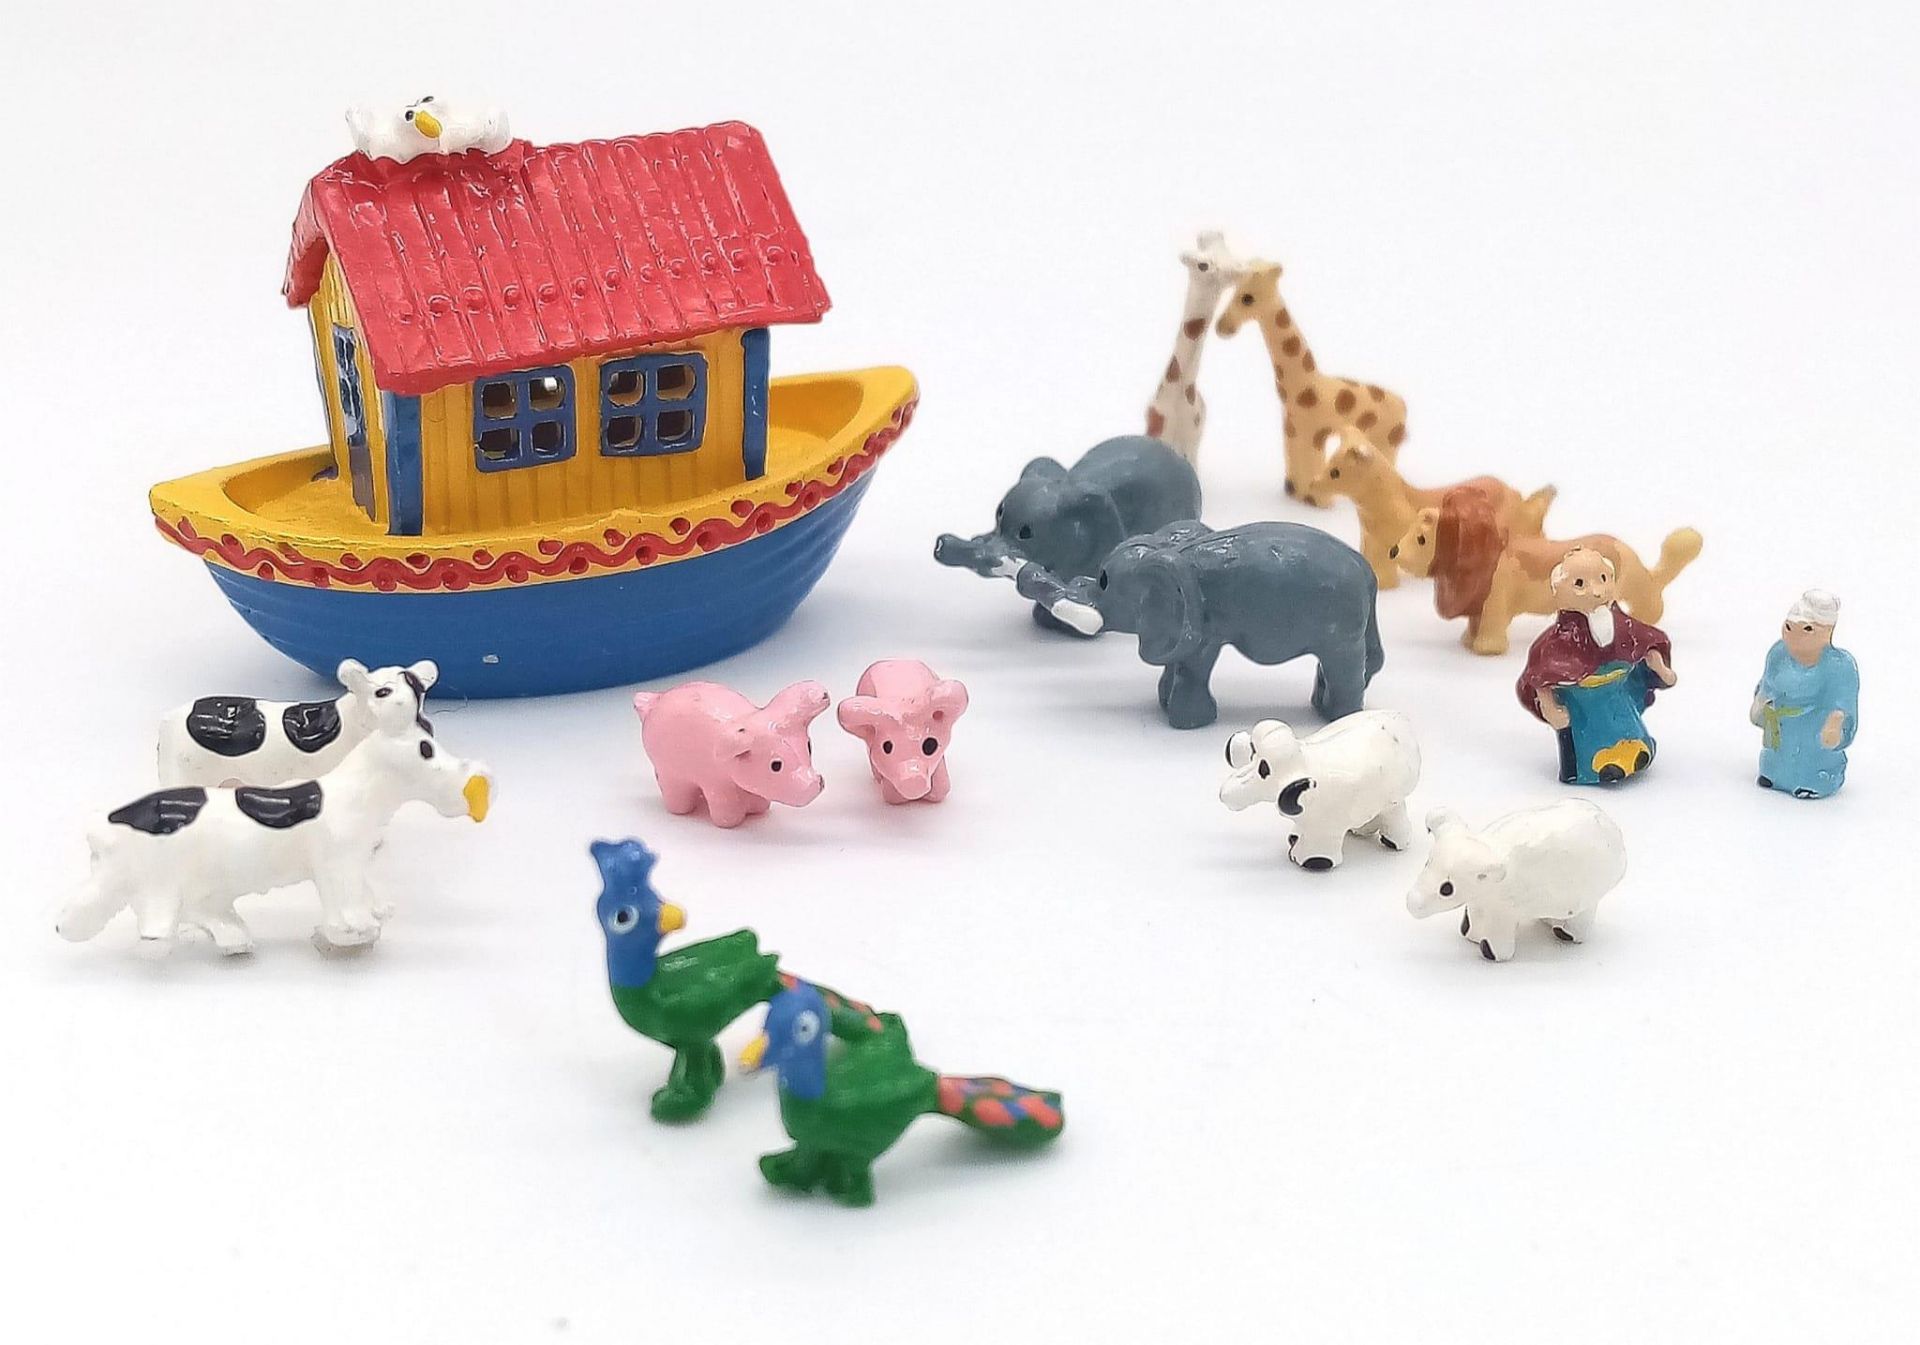 A Vintage Hantel Pewter Miniature Figurine - Noah's Ark and the Animals 2x2. - Image 3 of 5